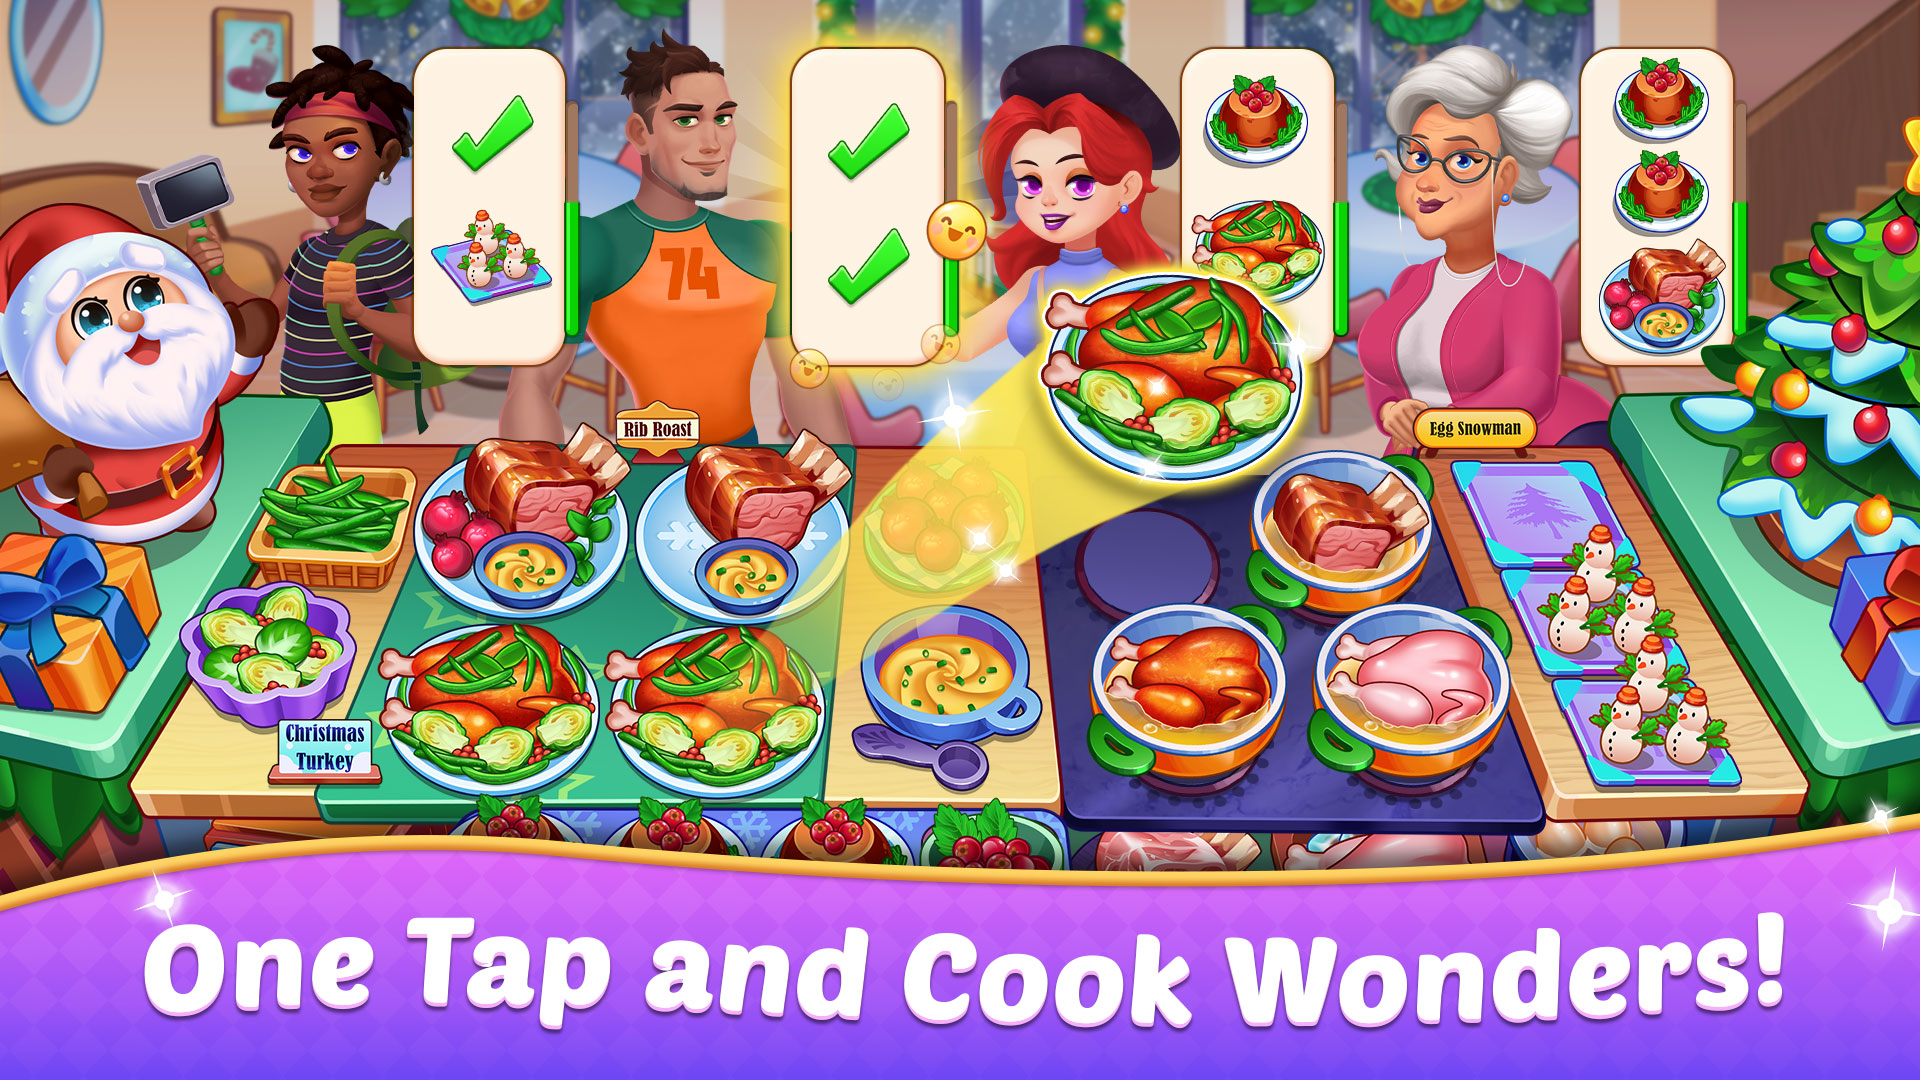 Mom's Diary : Cooking Games